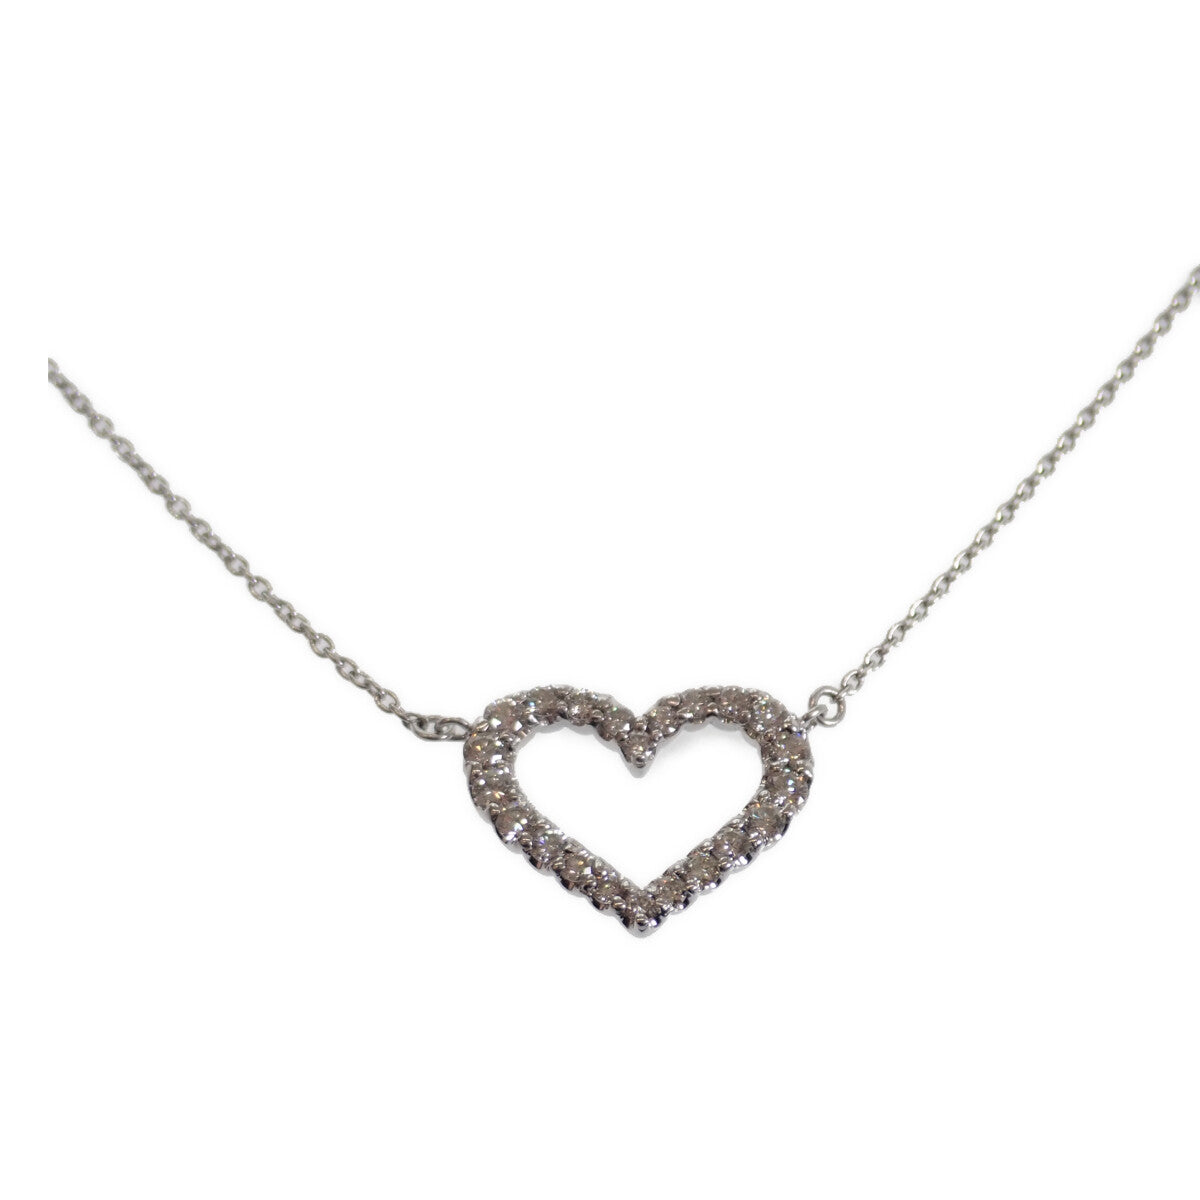 Heart Design Jewelry Pendant, K18WG, with D0.50CT Diamond - White Gold and Silver Accessory Necklace - Women's